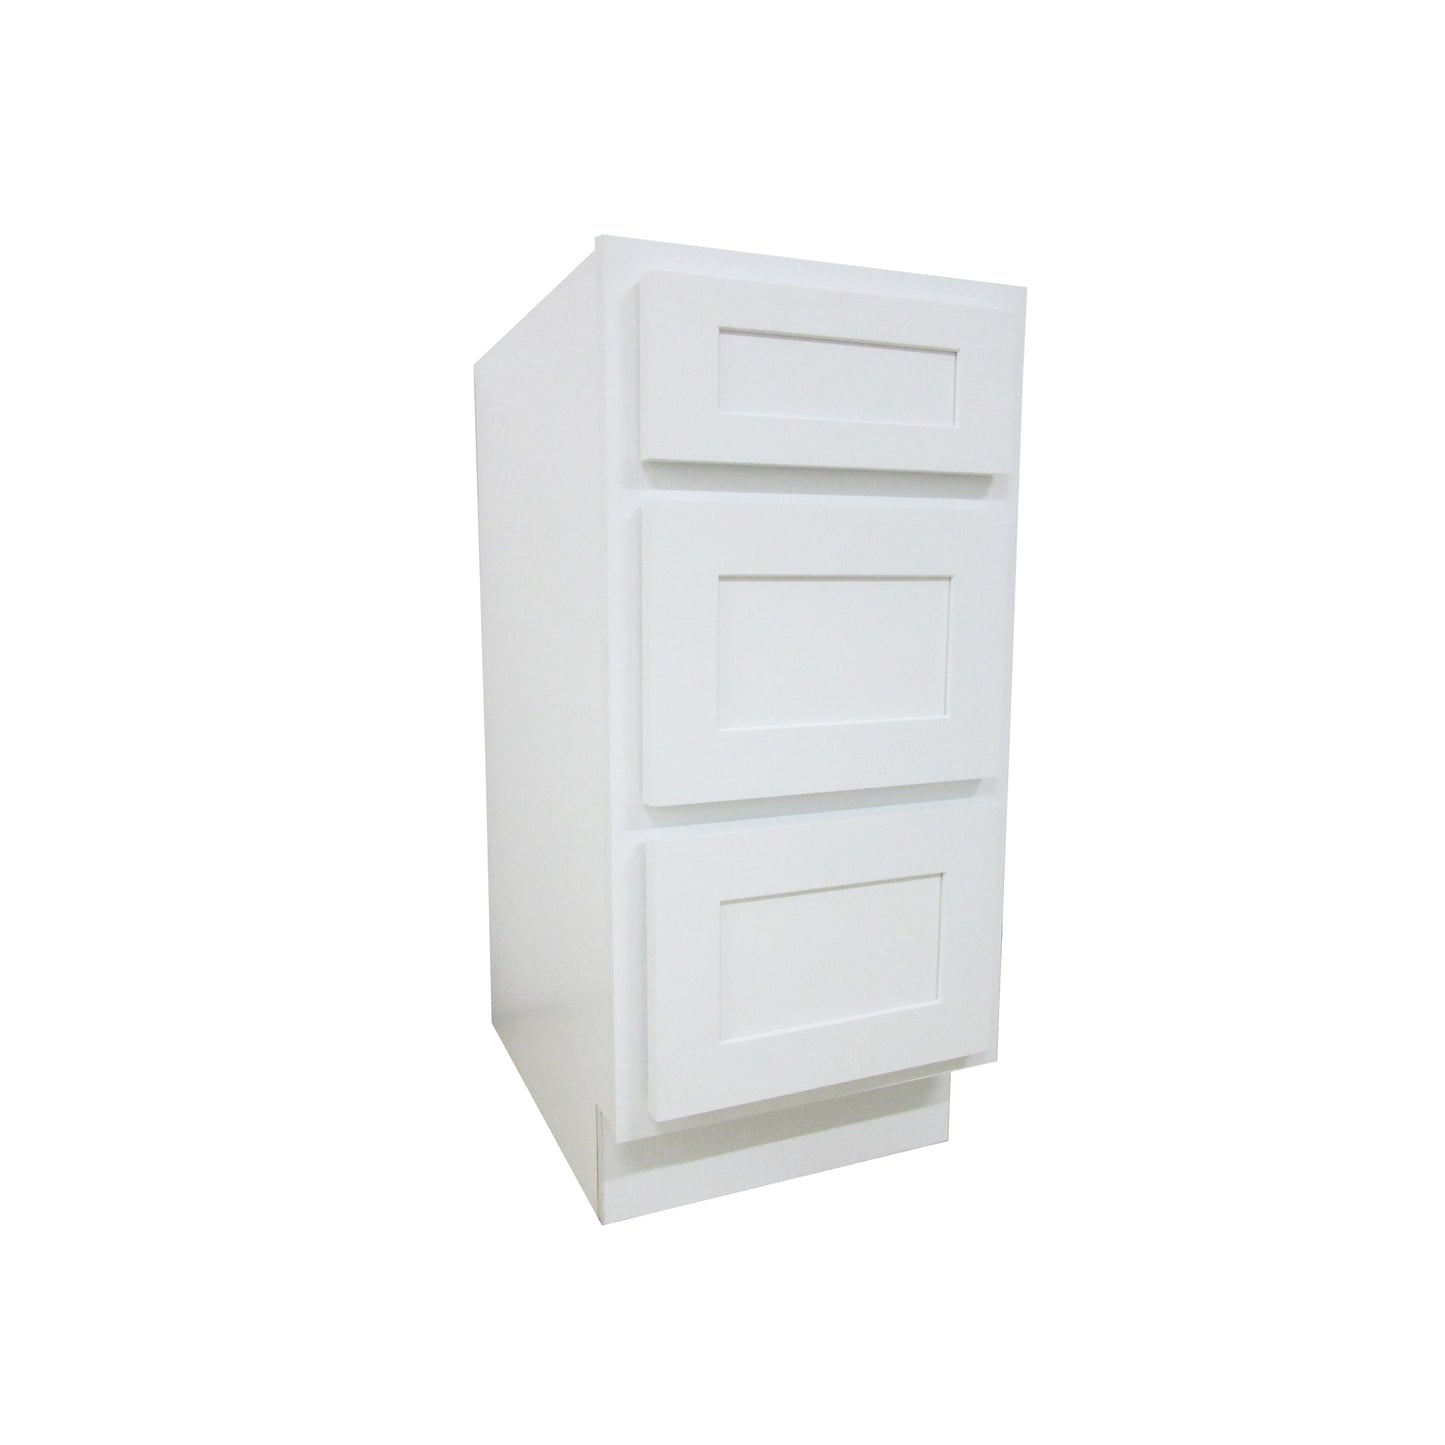 Vanity Art 15" White Single Freestanding Solid Wood Vanity Cabinet With 3 Soft Closing Drawers